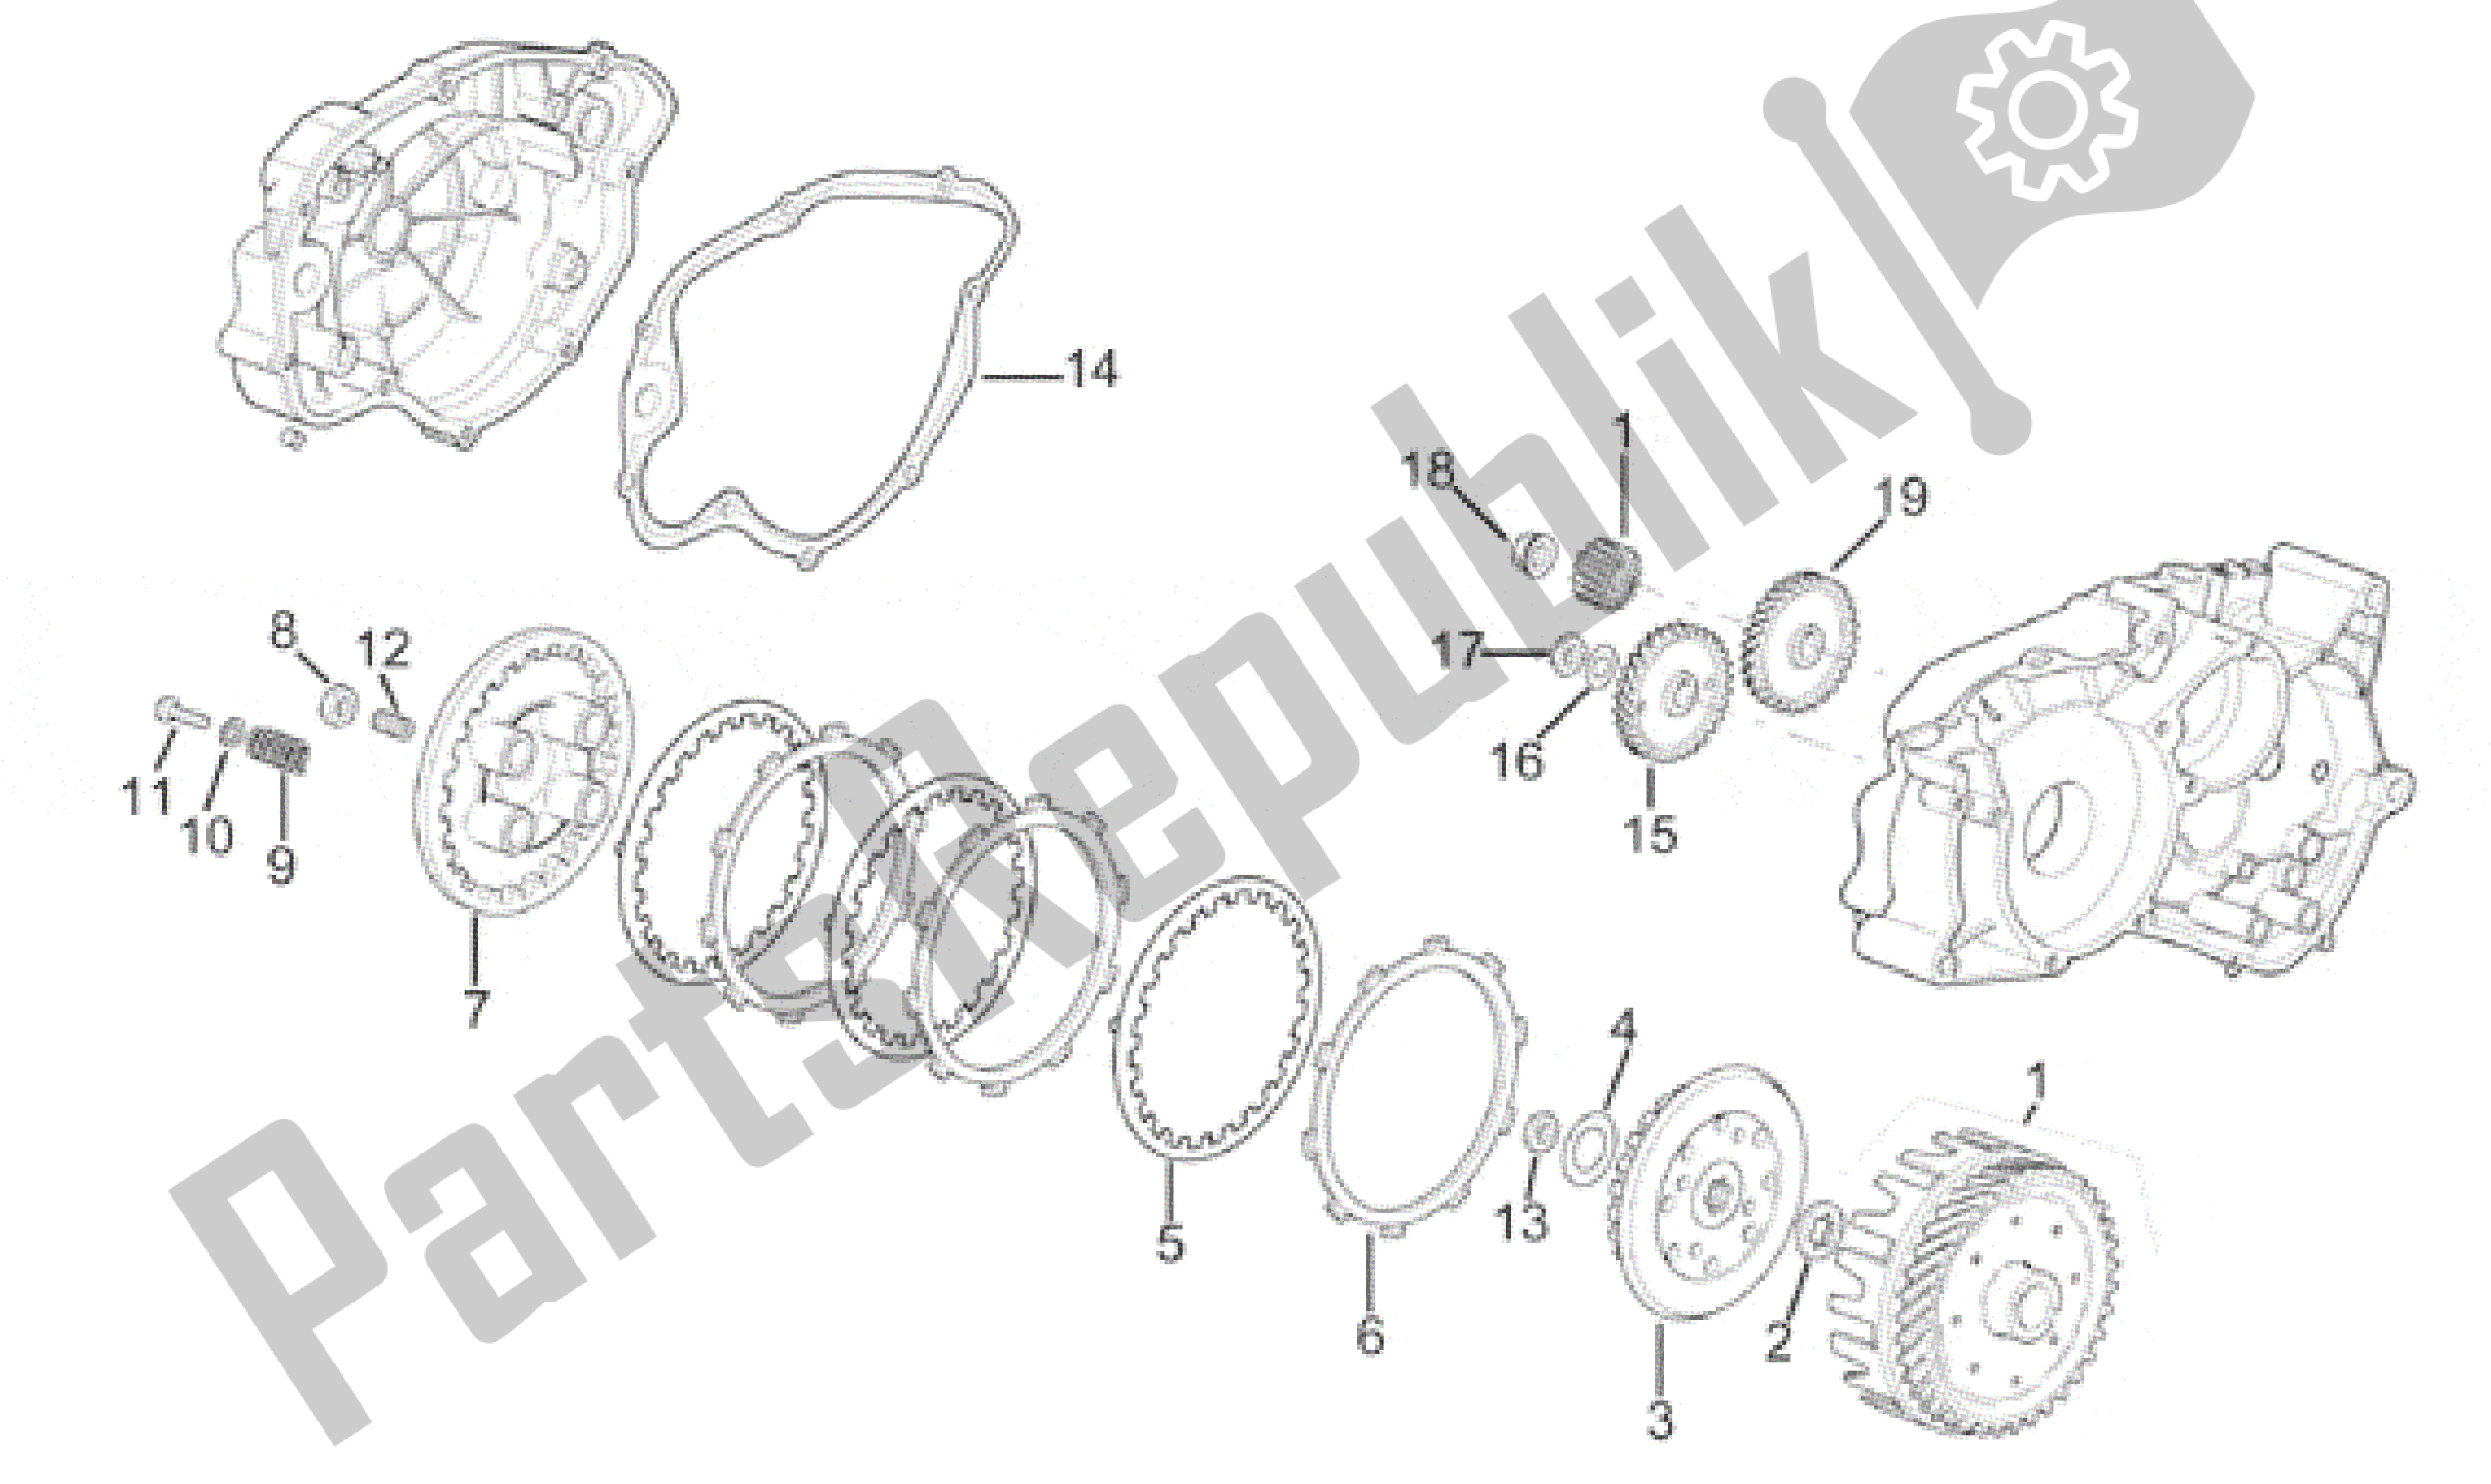 All parts for the Clutch of the Aprilia Classic 50 1992 - 1999